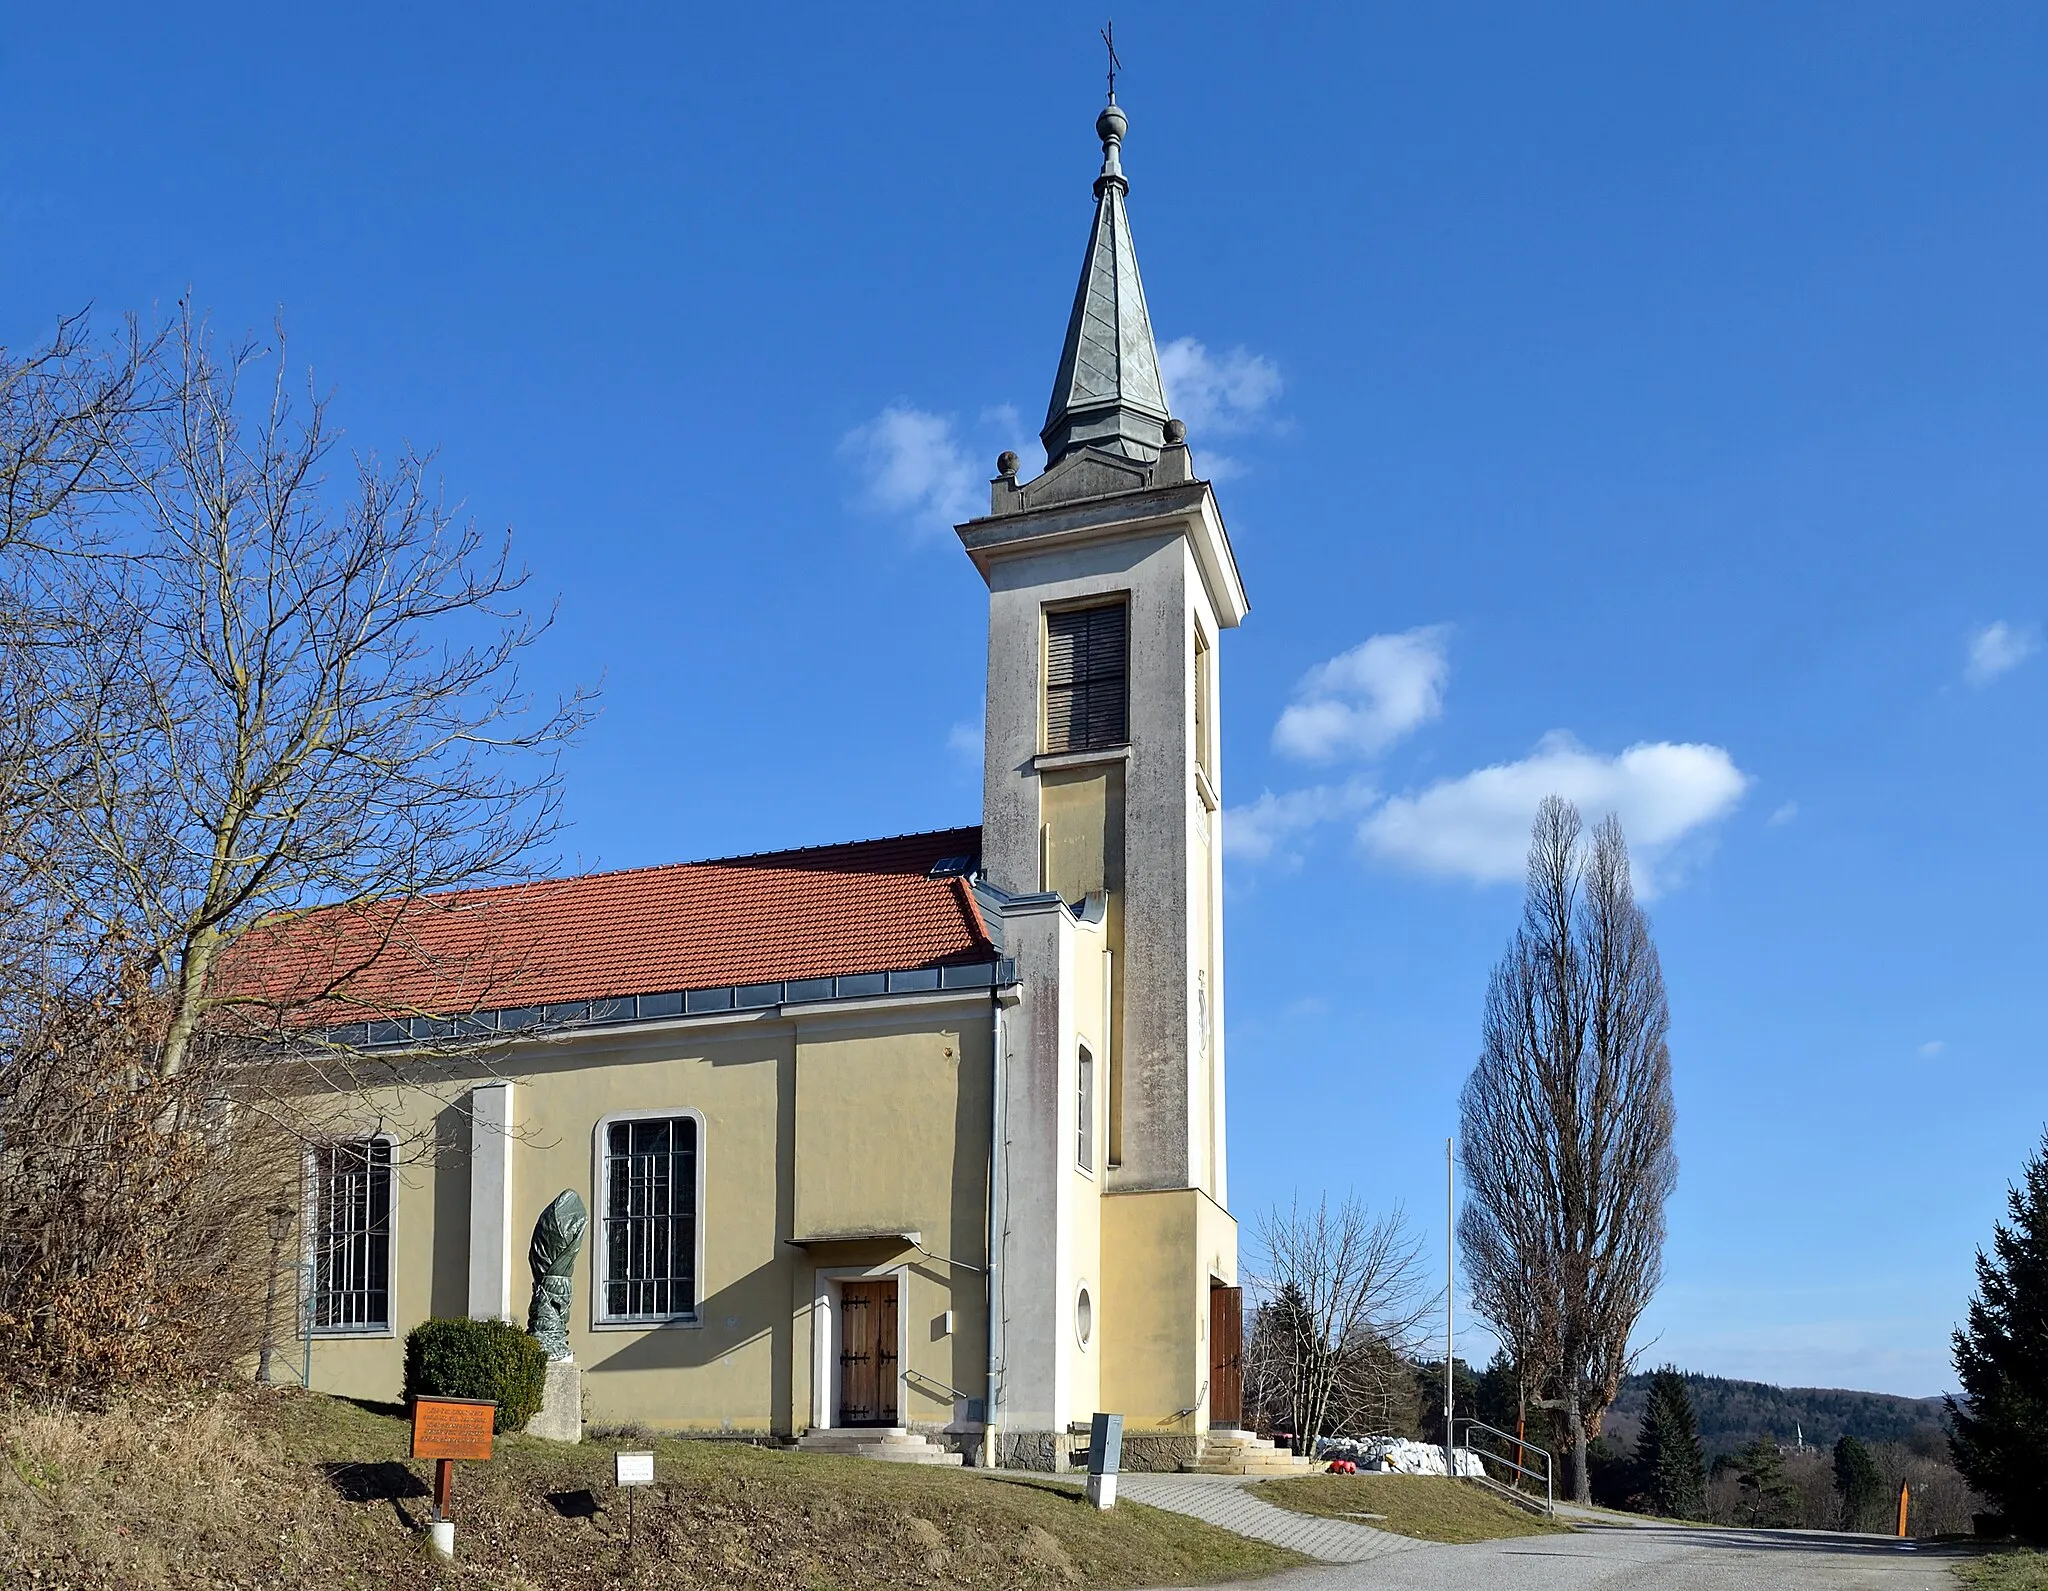 Photo showing: Maria Schnee (Our lady of the snow) in Irenental, municipality of Tullnerbach, was built in 1900.